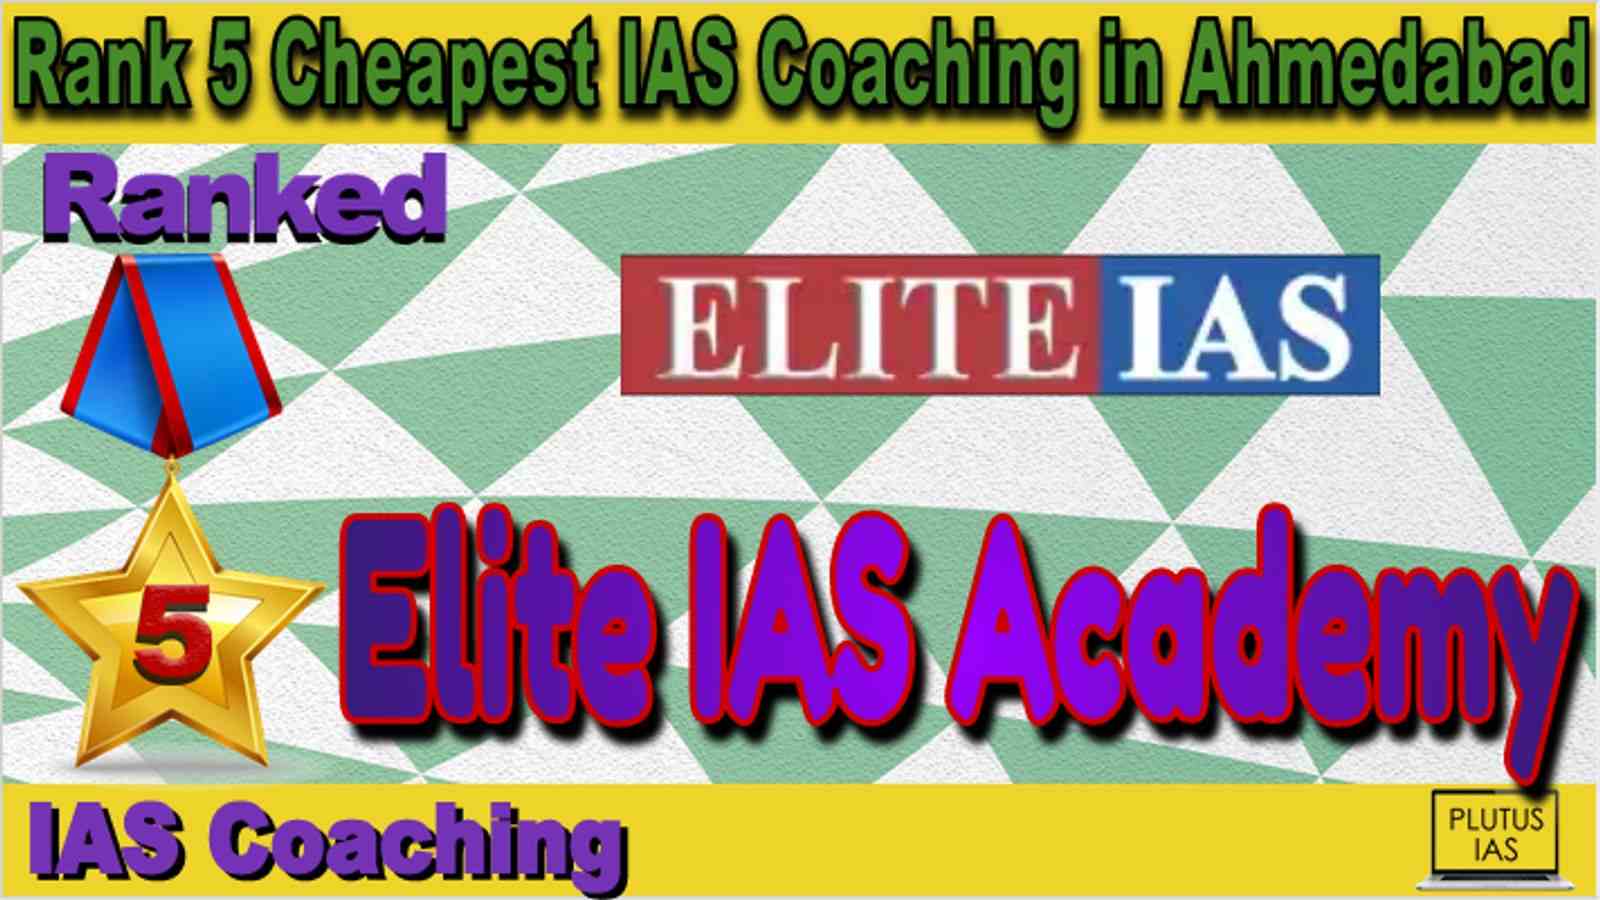 Rank 5 Cheapest IAS Coaching in Ahmedabad